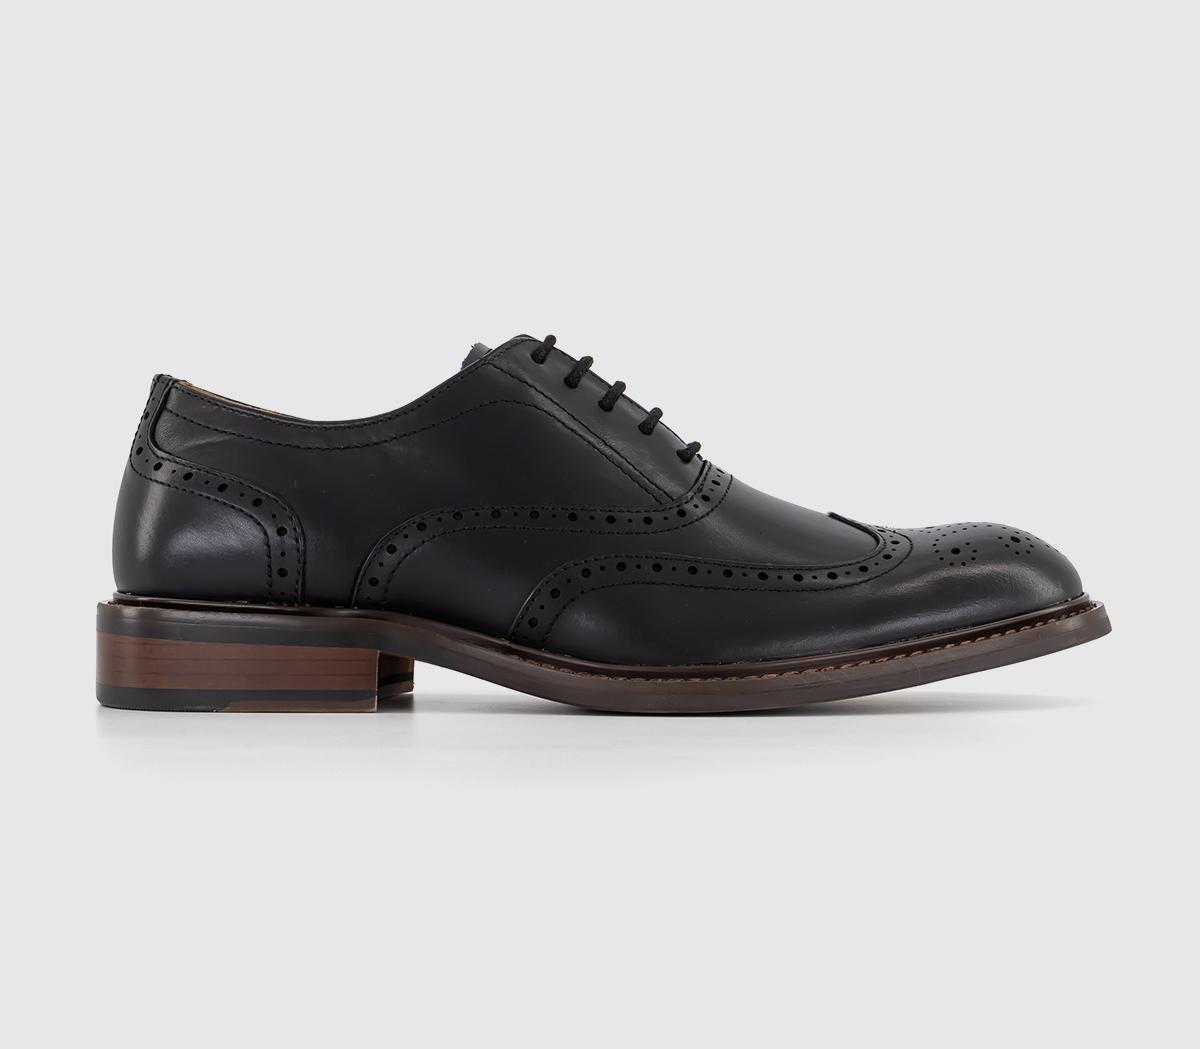 OFFICEMaxwell Oxford BroguesBlack Leather